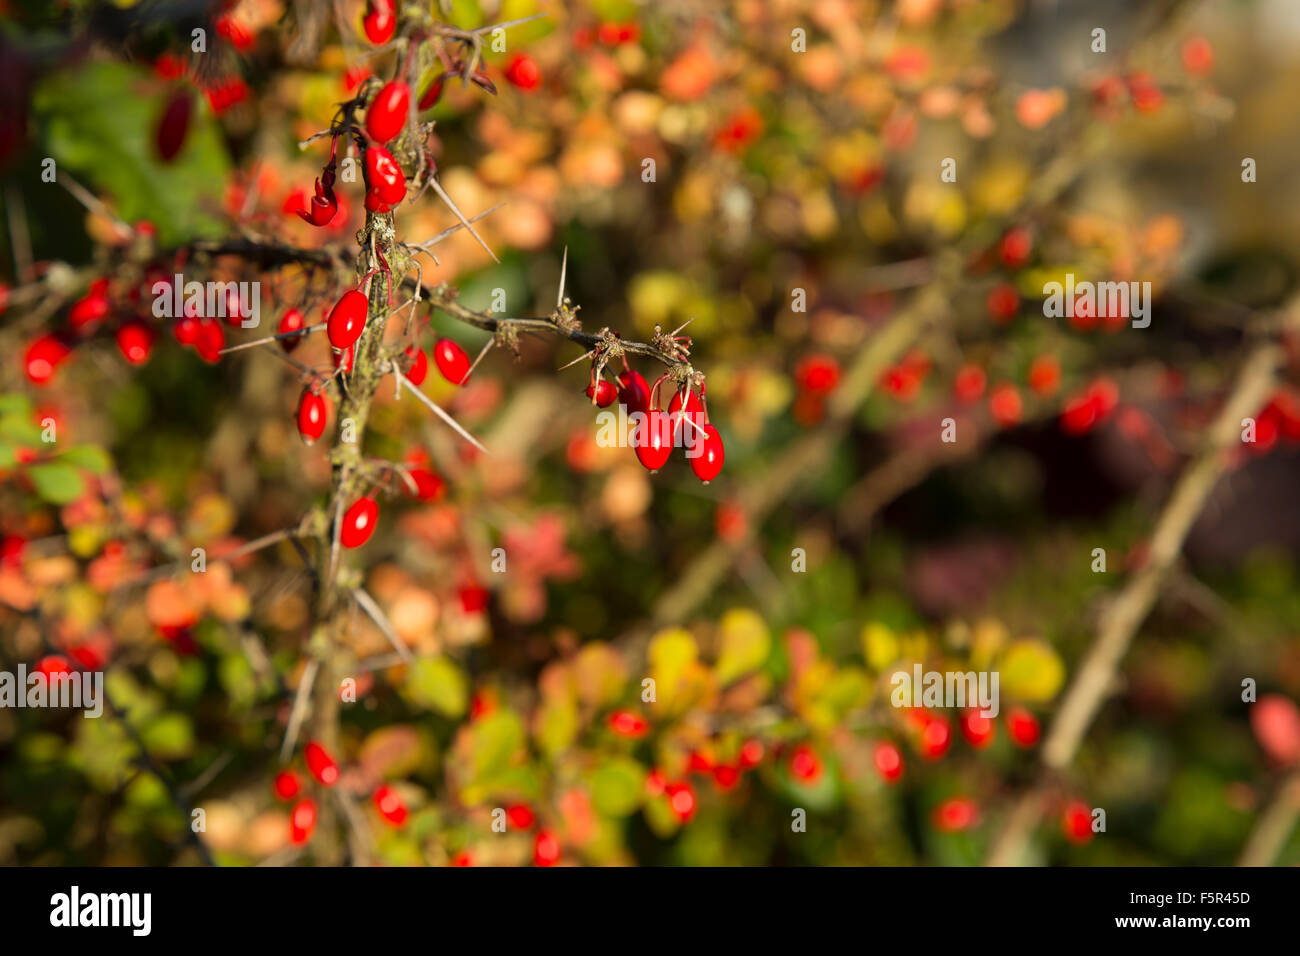 Red winter berries with sharp thorny spikes Stock Photo